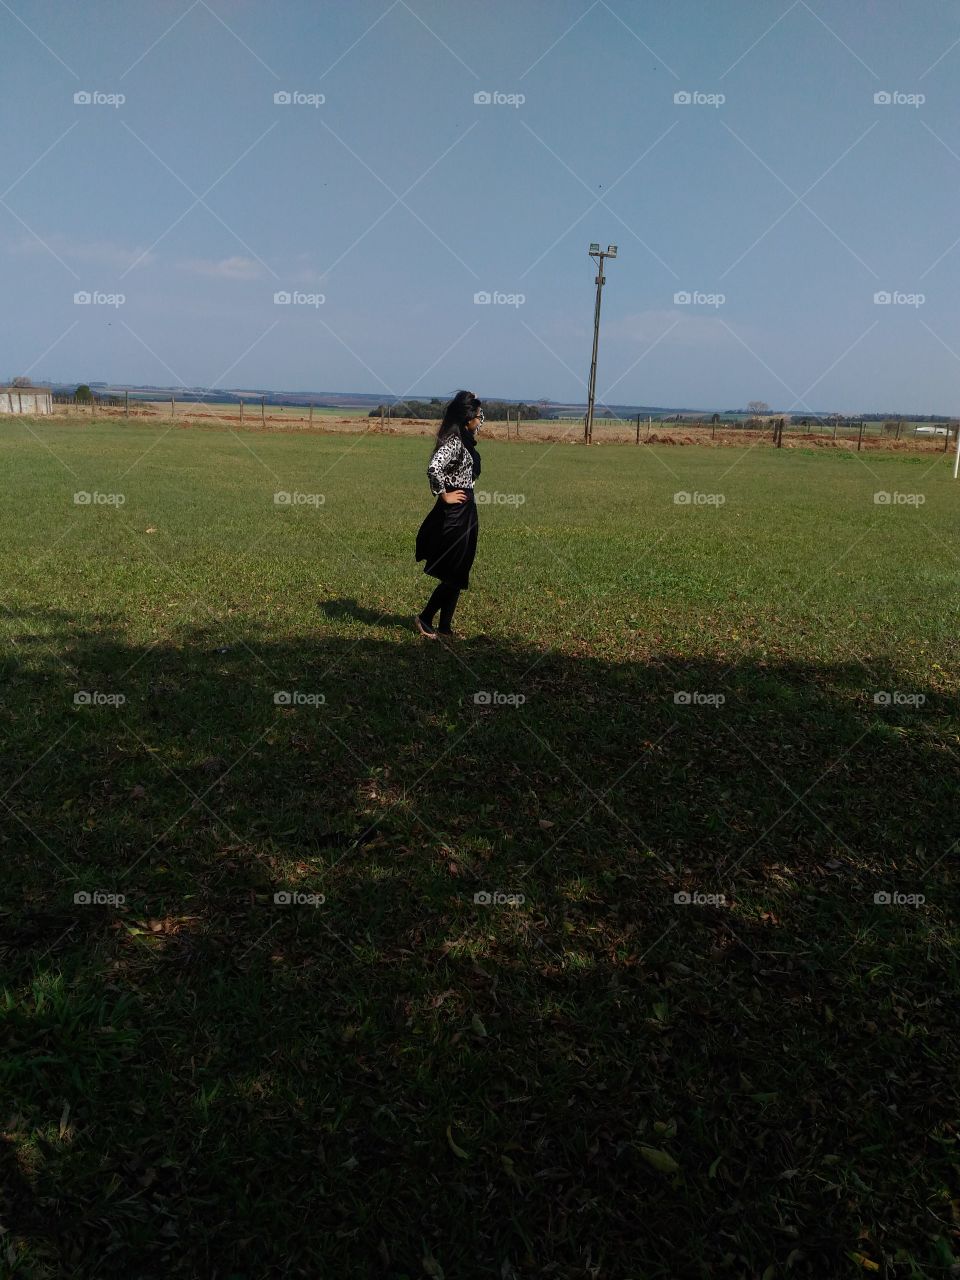 Landscape, People, Competition, Girl, Cropland